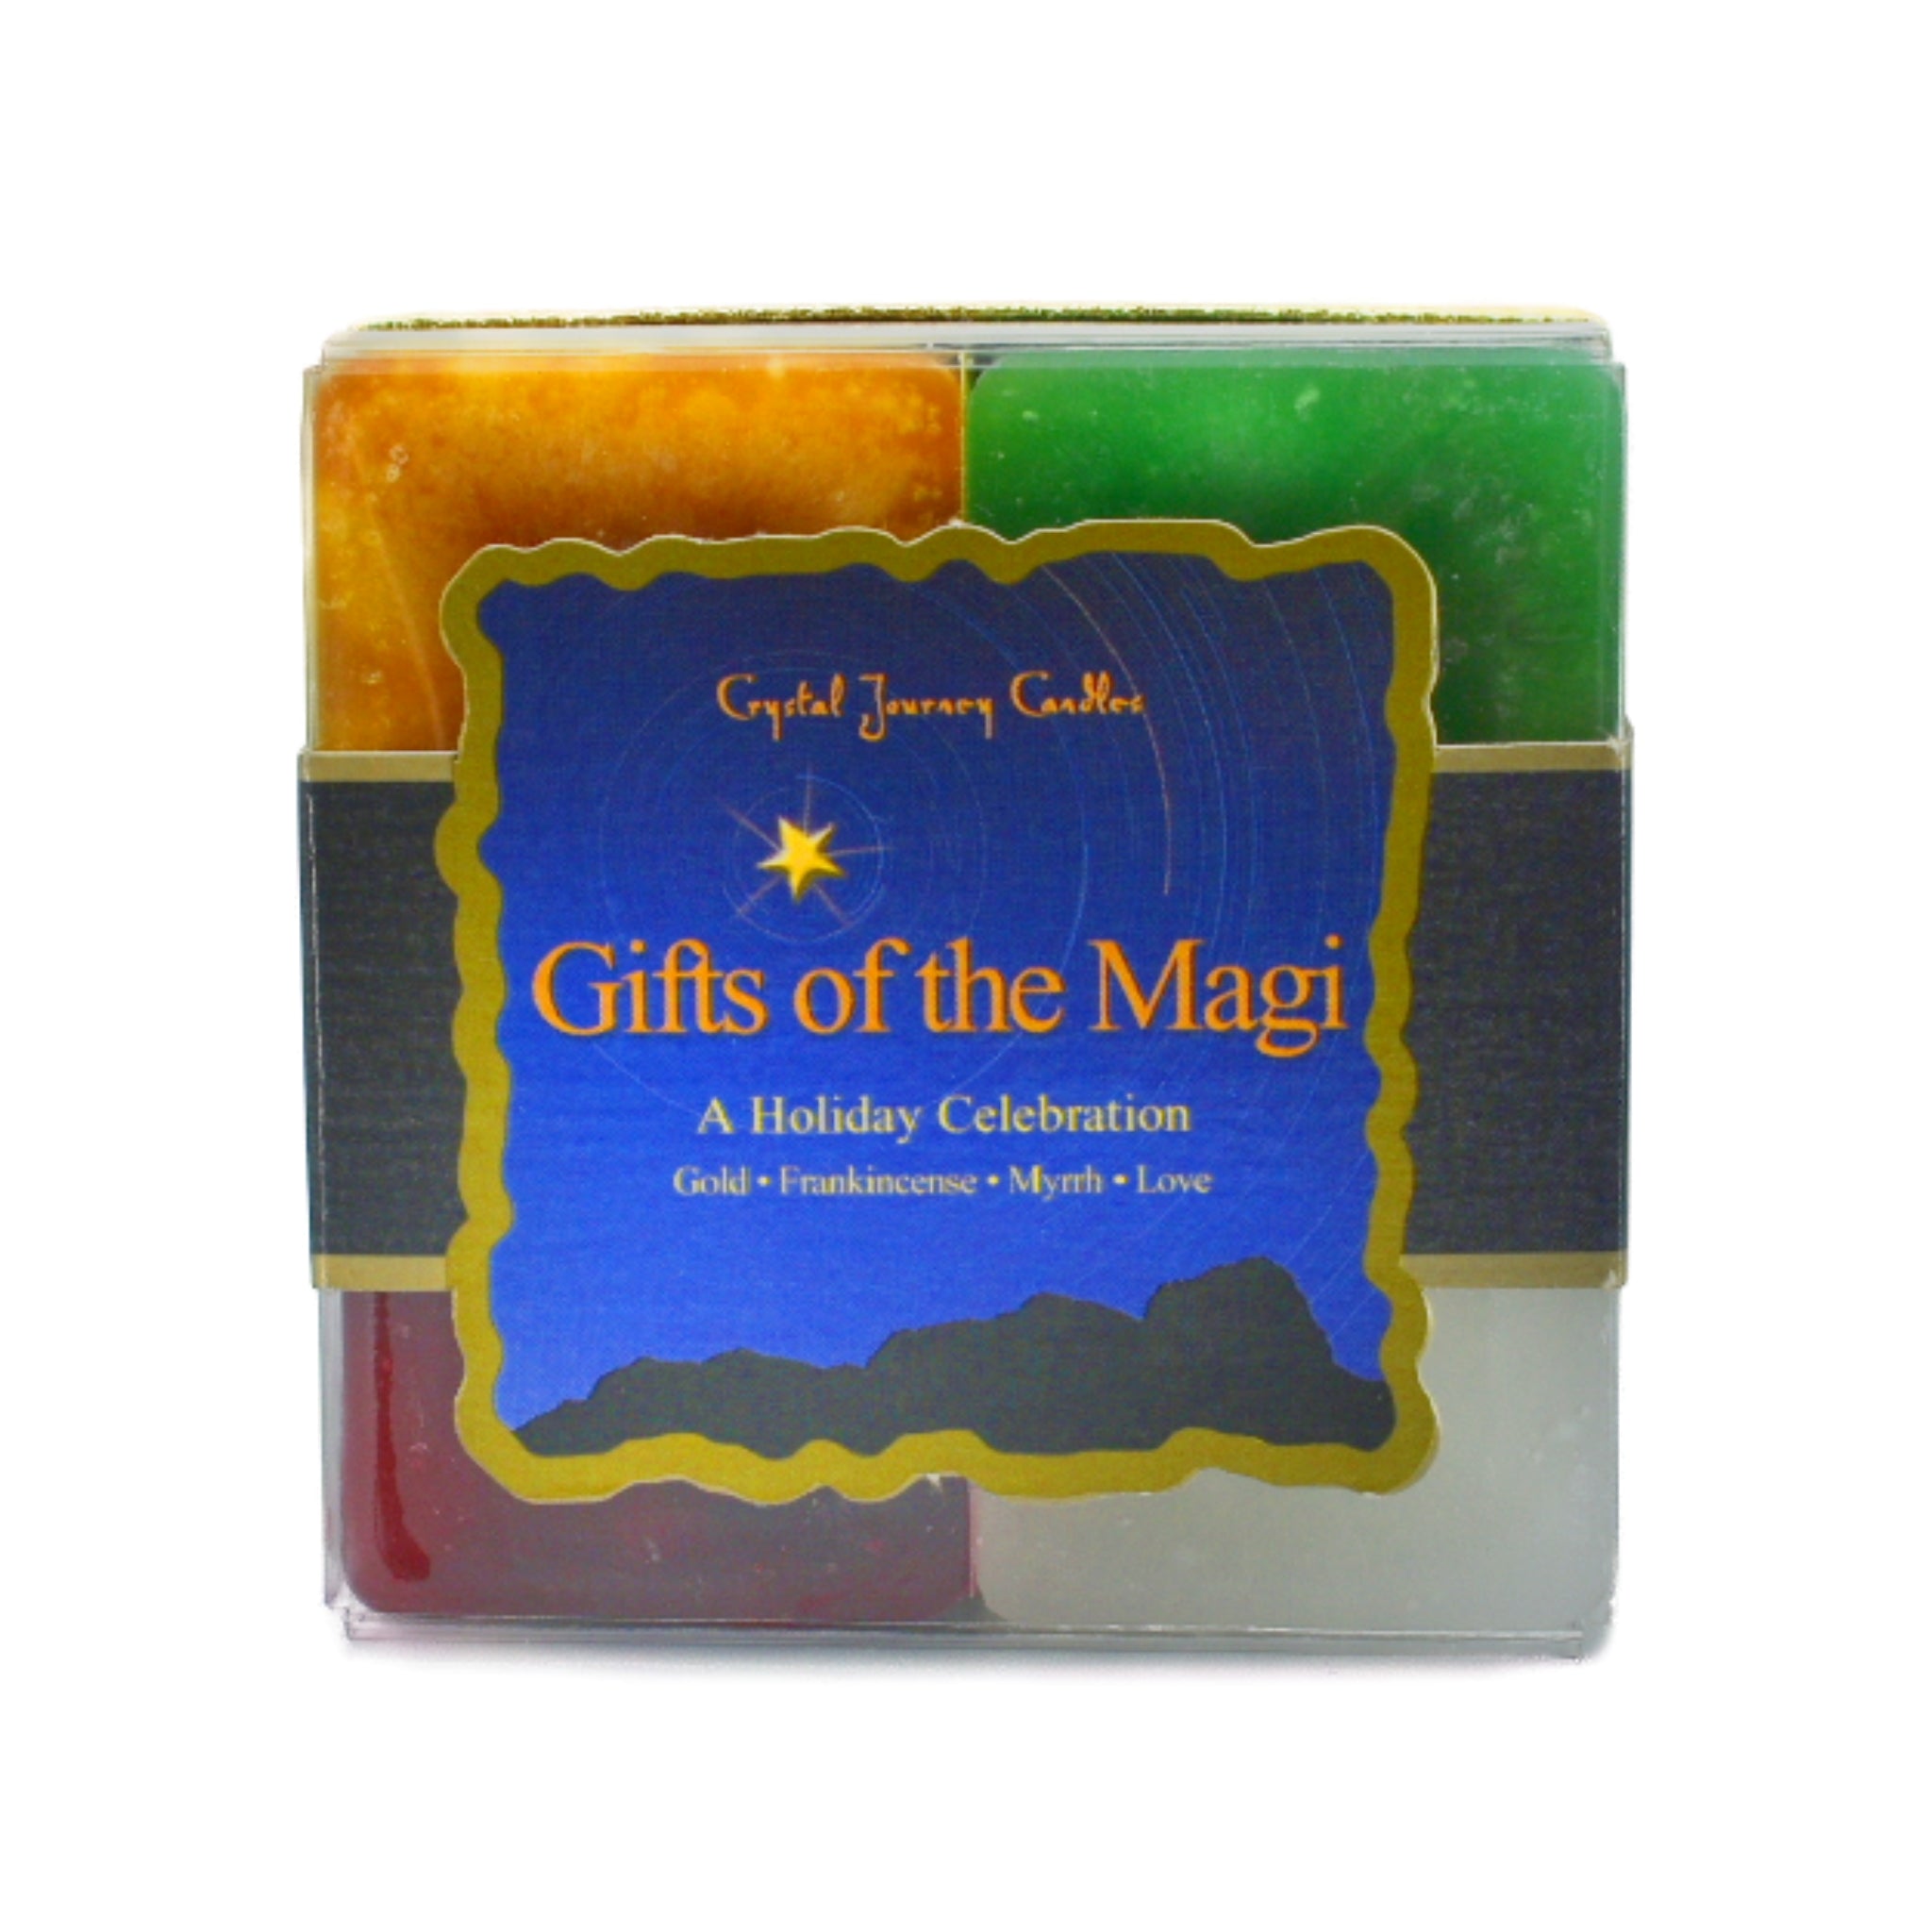 Gifts of the Magi Square Pack Candle.  scented with Frankincense, Myrrh, Gold and Love.  It embodies the sentiments of tradition, giving, sharing, new life and friendship.  Colors of the candles are green, white, red and orange.